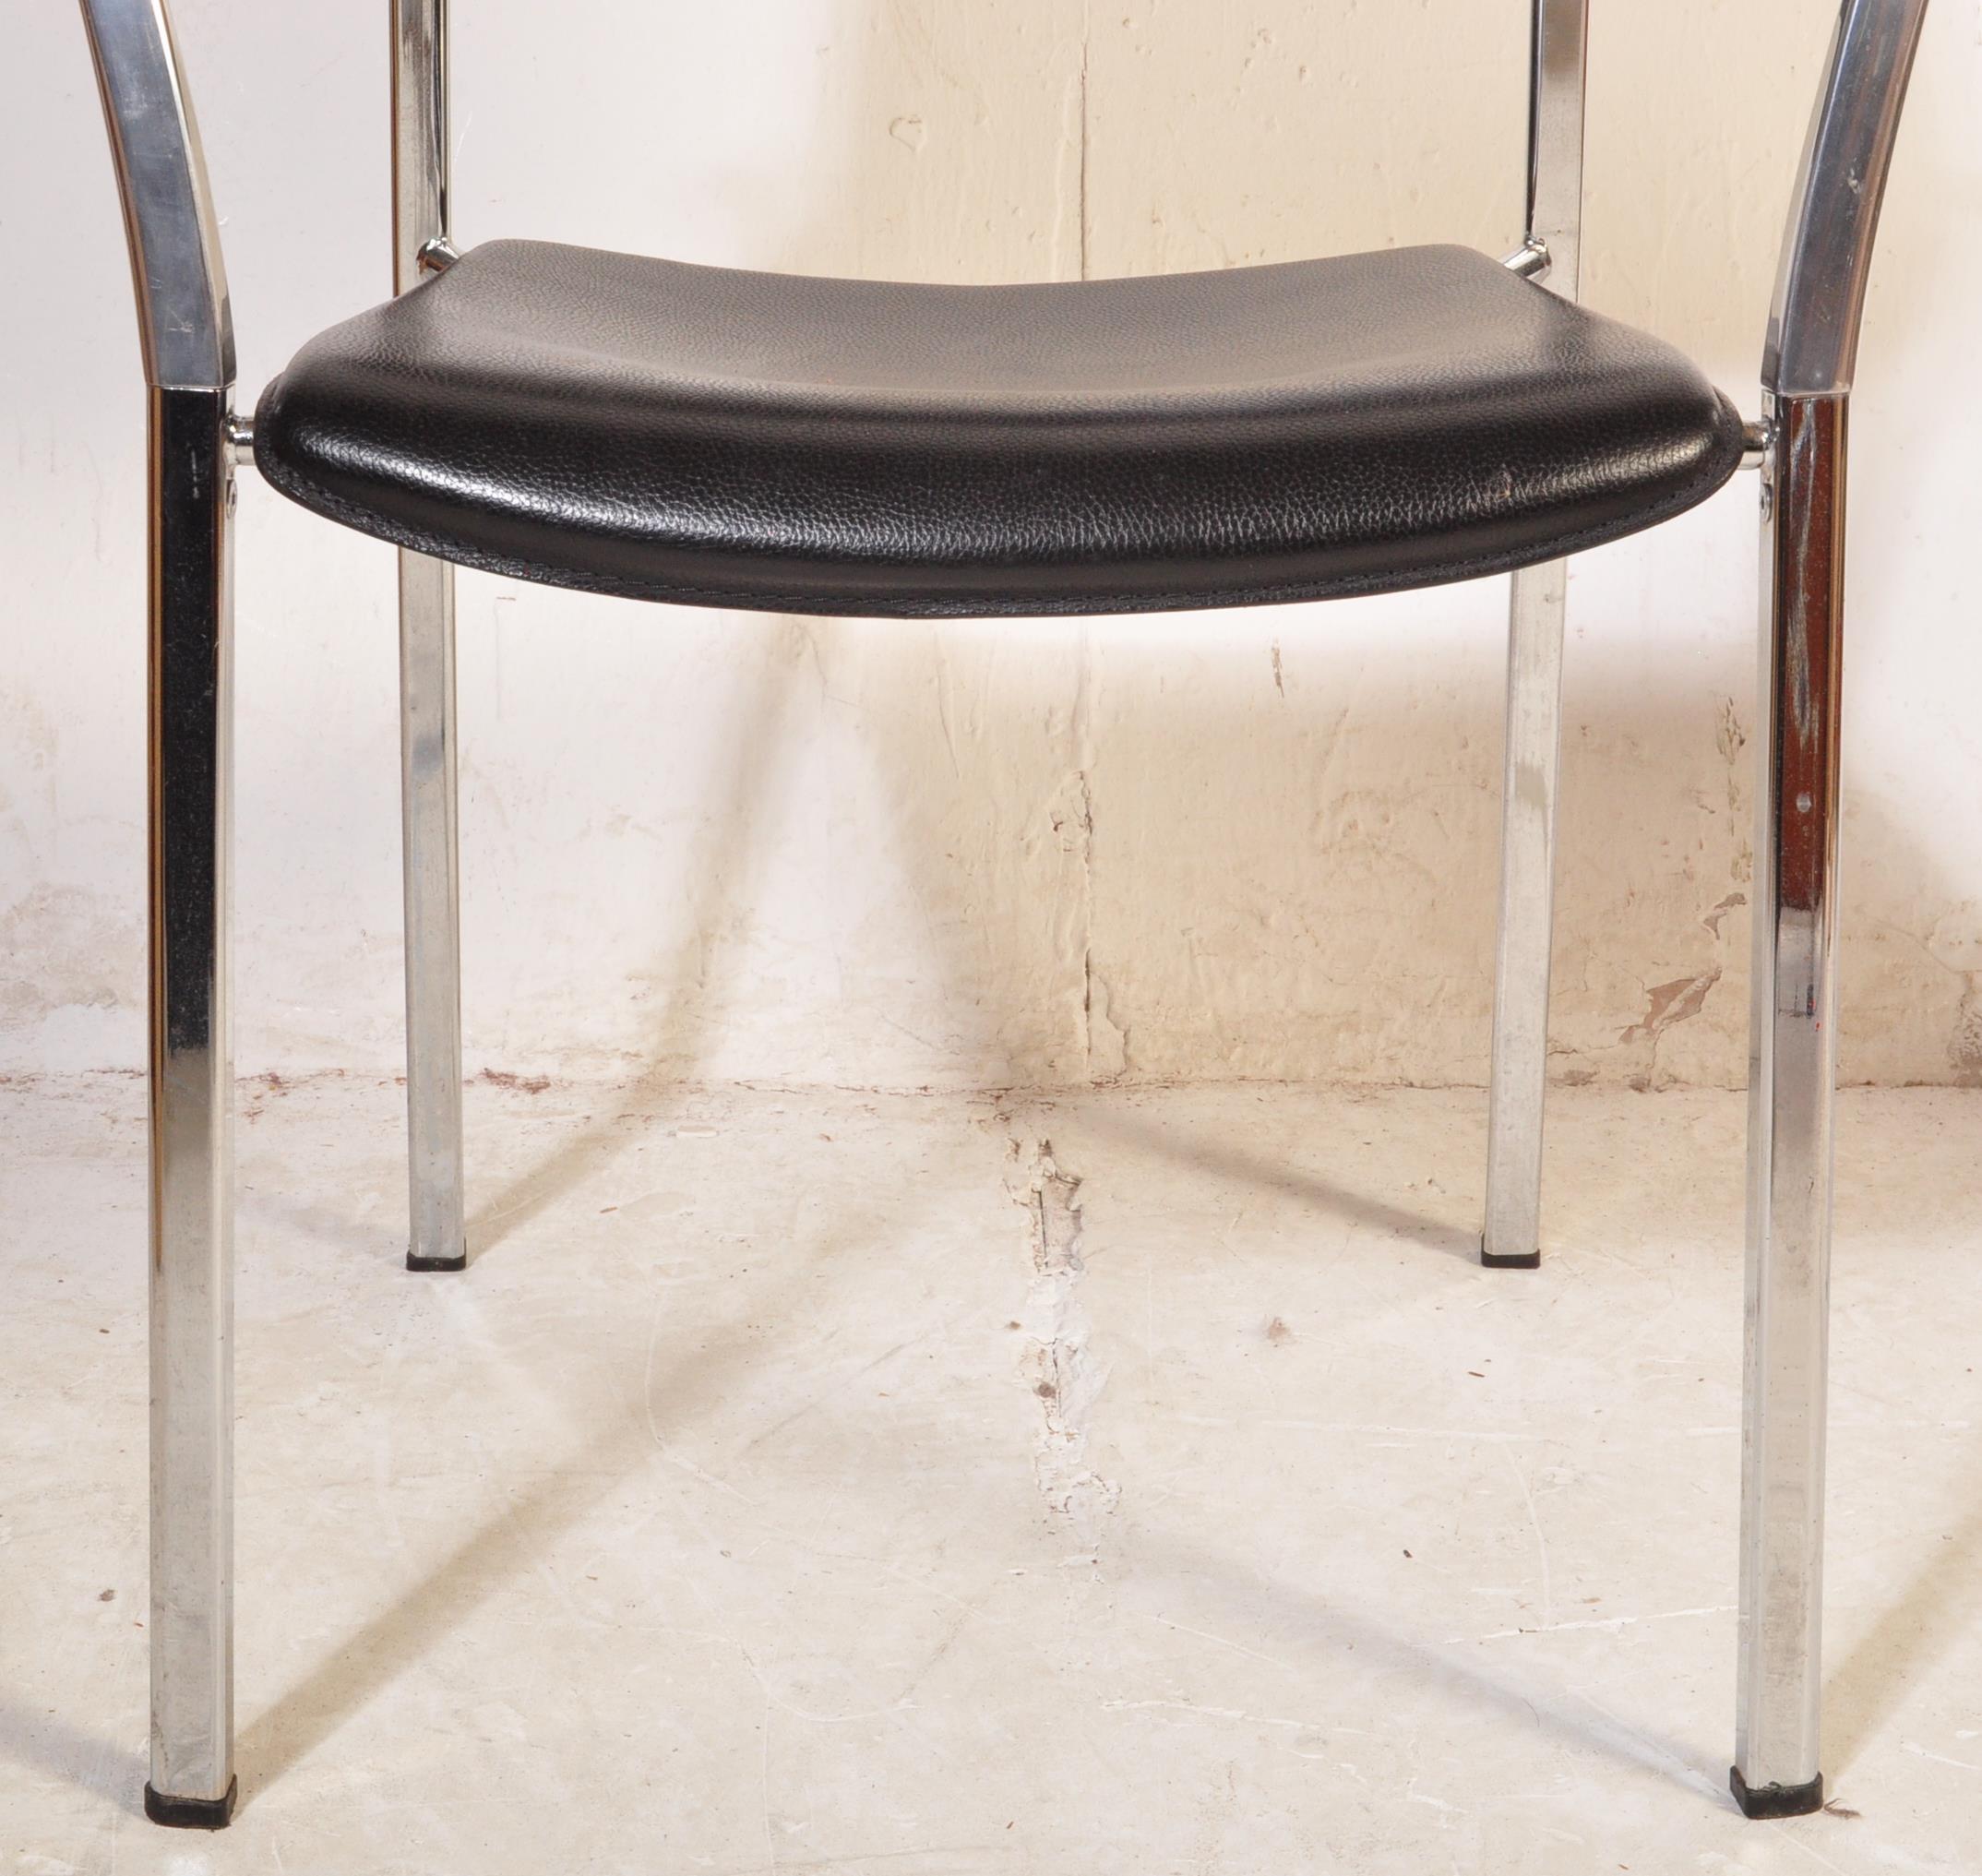 PAIR OF MID CENTURY BLACK LEATHERETTE & CHROME CHAIRS - Image 6 of 7